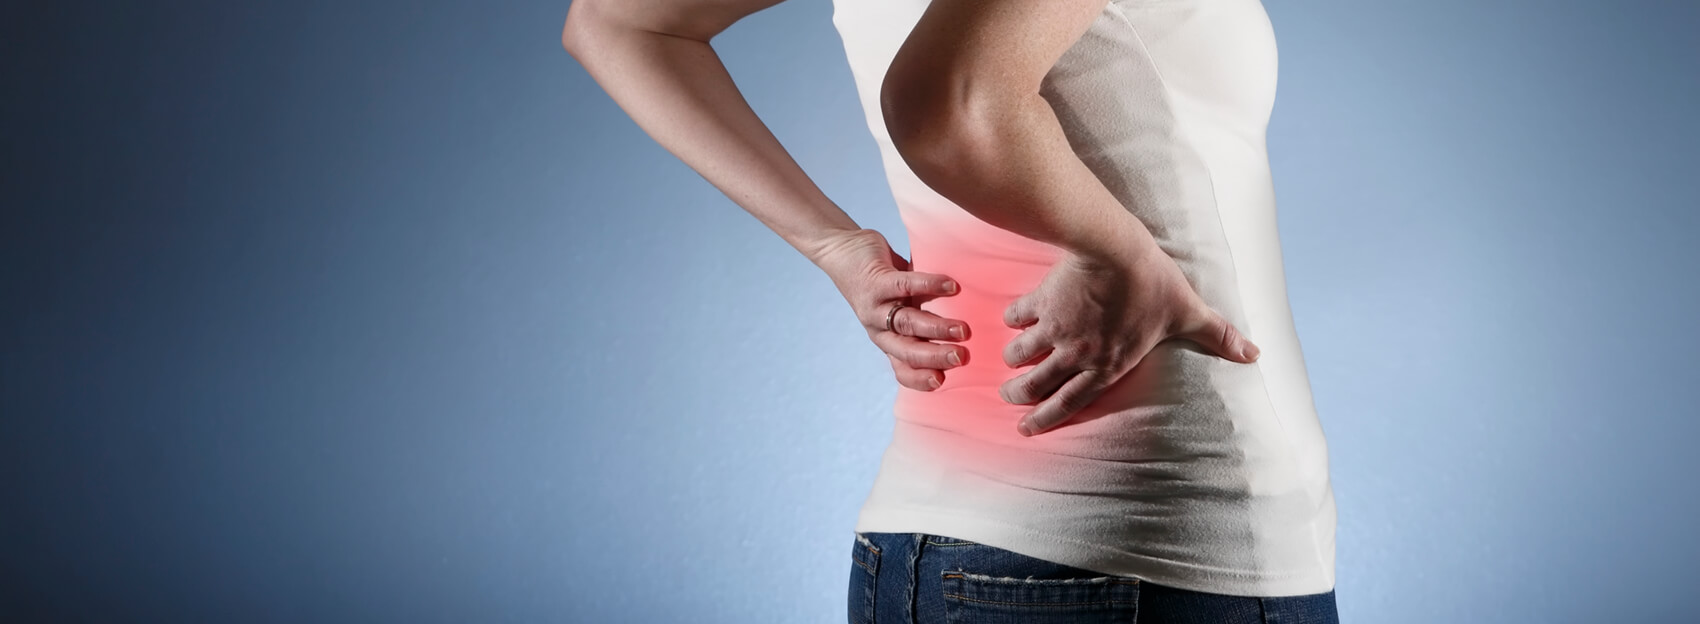 Chiropractic Services for Chronic and Acute Pain Relief